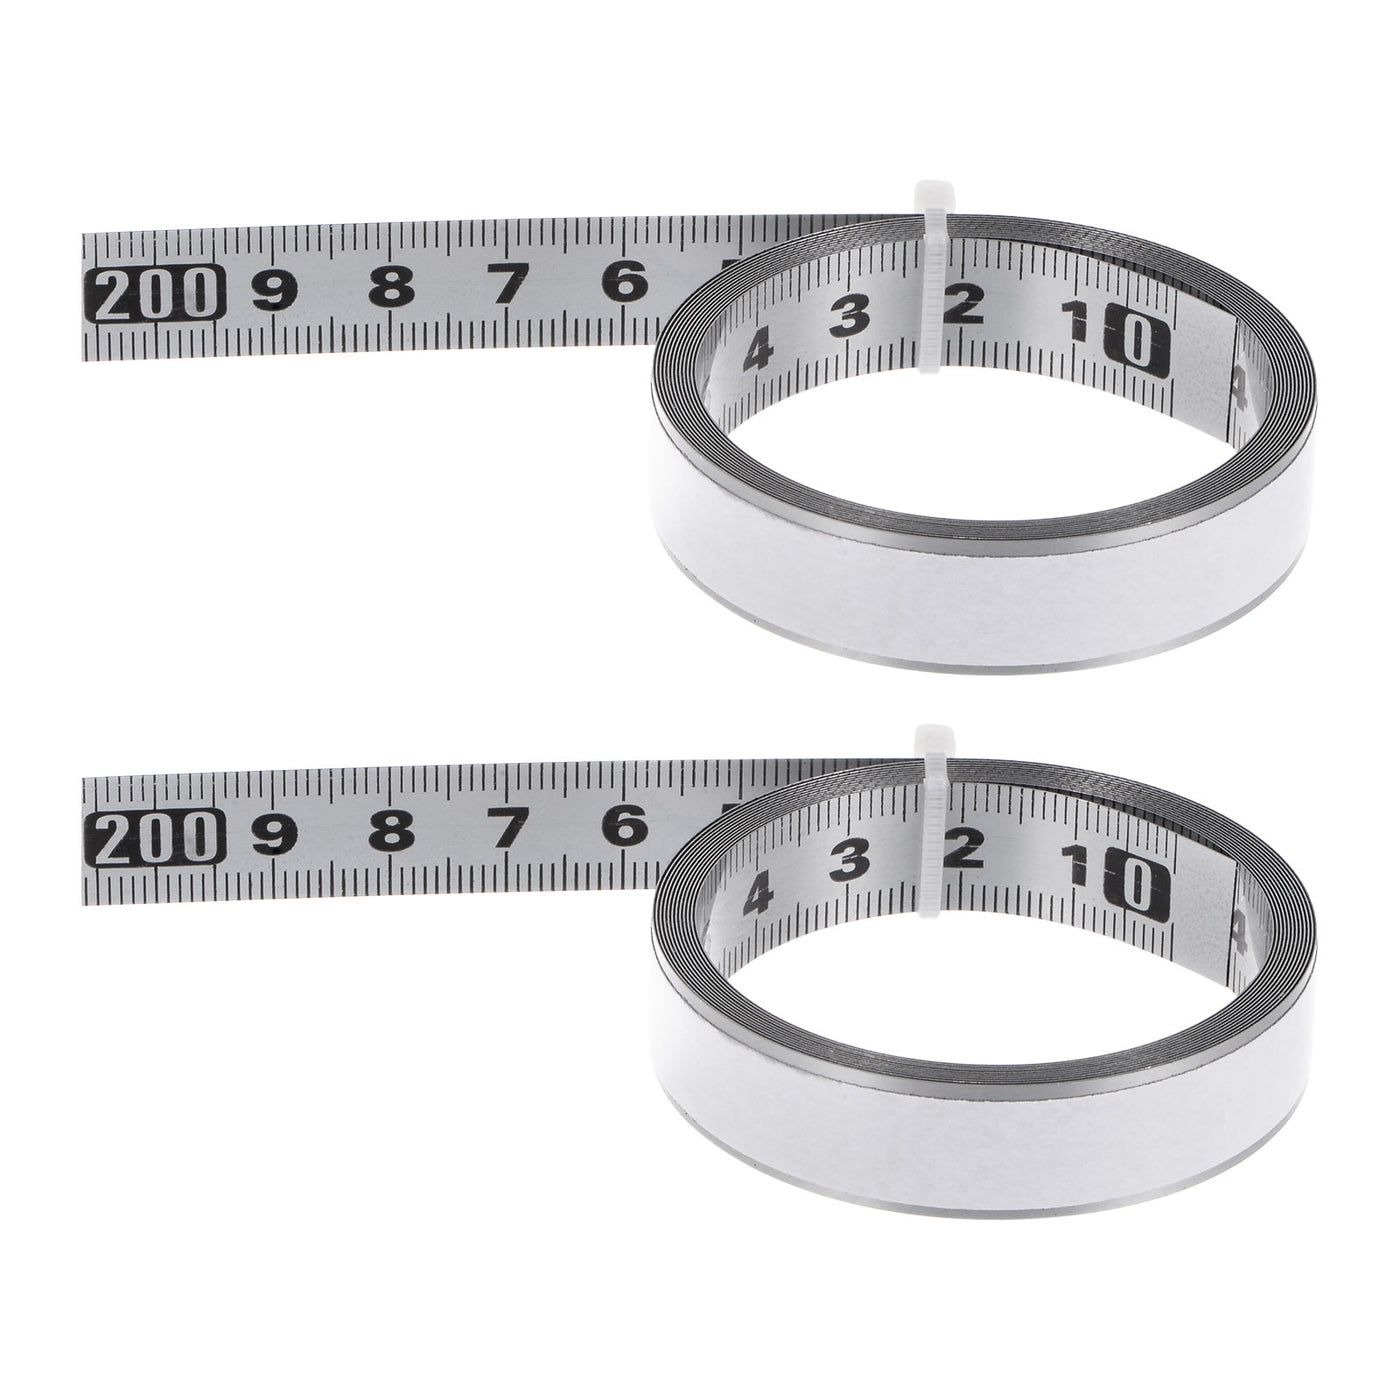 Self Adhesive Tape Measure 300cm Start from Middle Steel Ruler Tape, Yellow